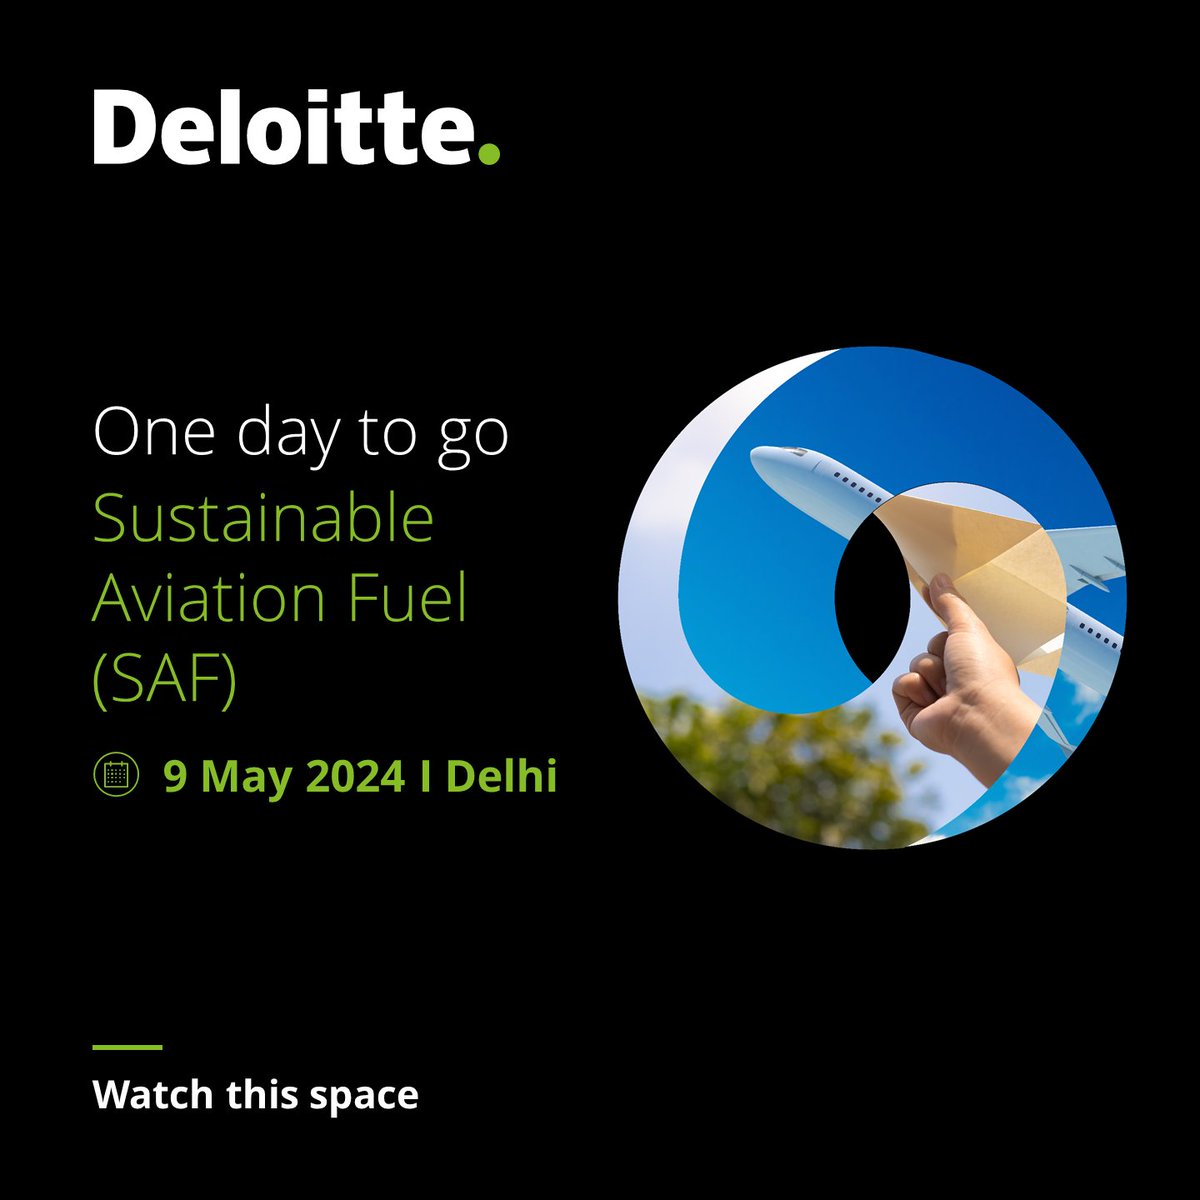 We are just a day away from an insightful workshop on Sustainable Aviation Fuel (SAF) by Deloitte India in collaboration with Indian Institute of Technology, Roorkee. 

To learn more, click here: deloi.tt/3UAL5NY

#Sustainability #Aviation #SAF #FutureOfFlight